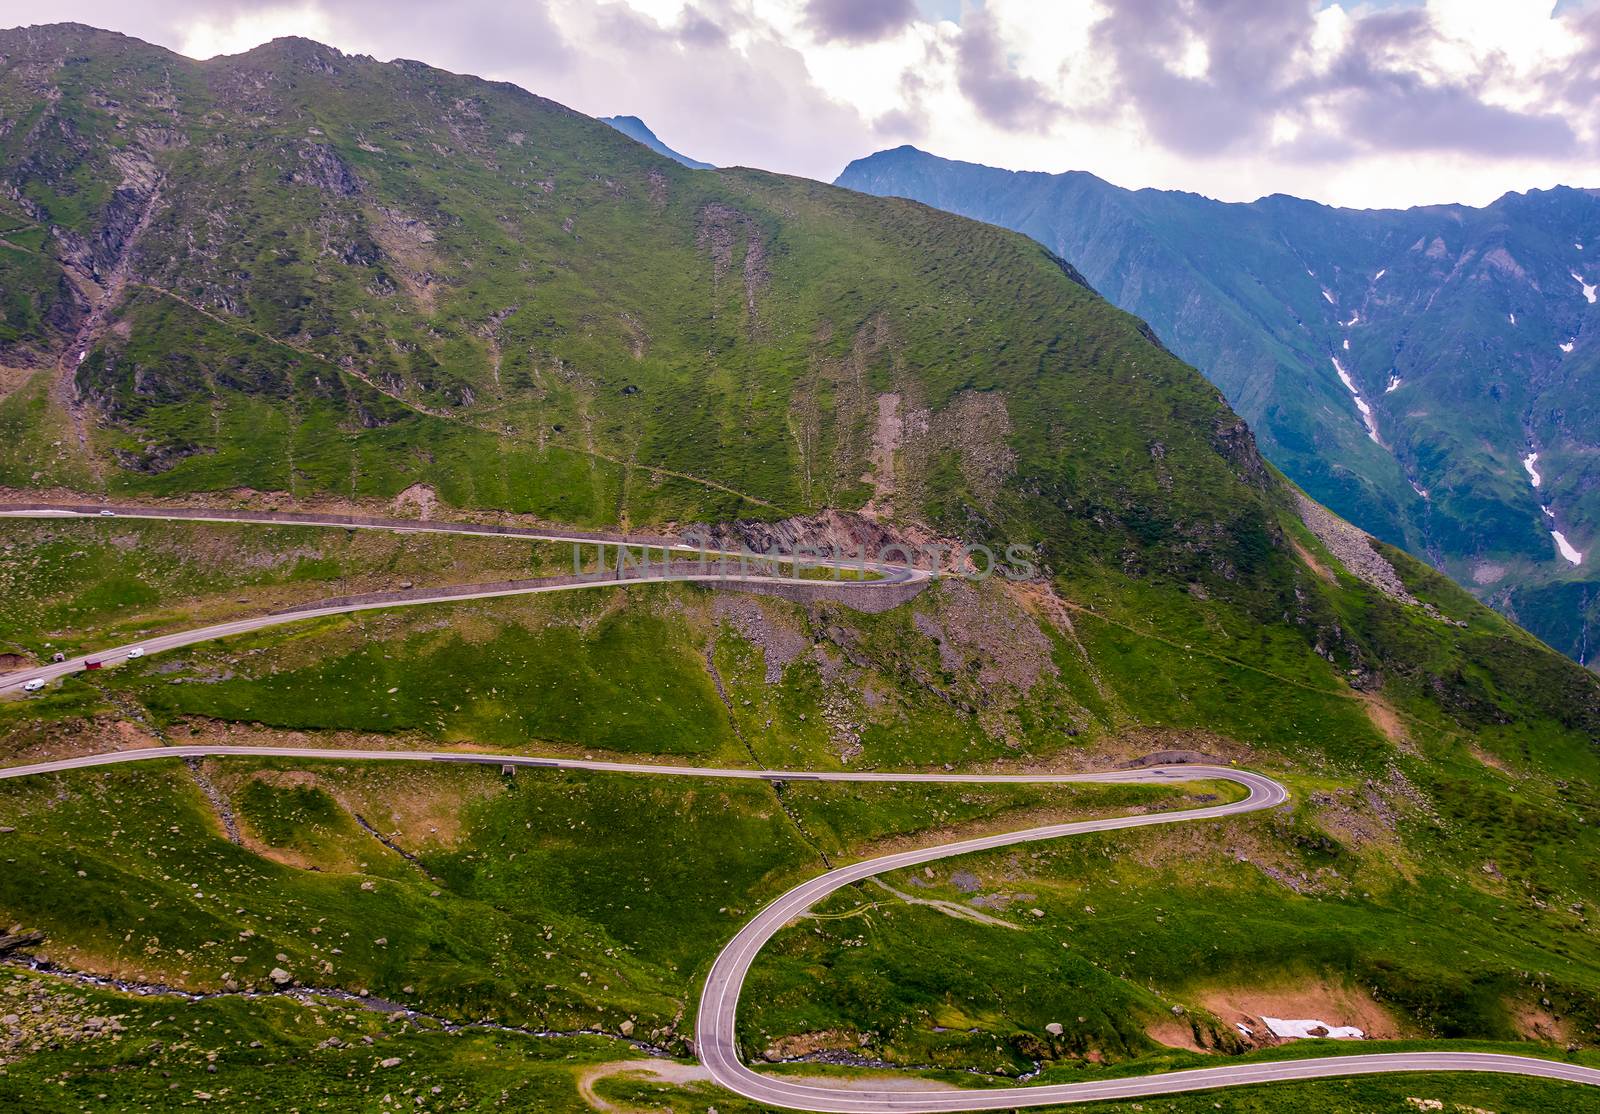 serpentine of Transfagarasan road in mountains. lovely transportation background